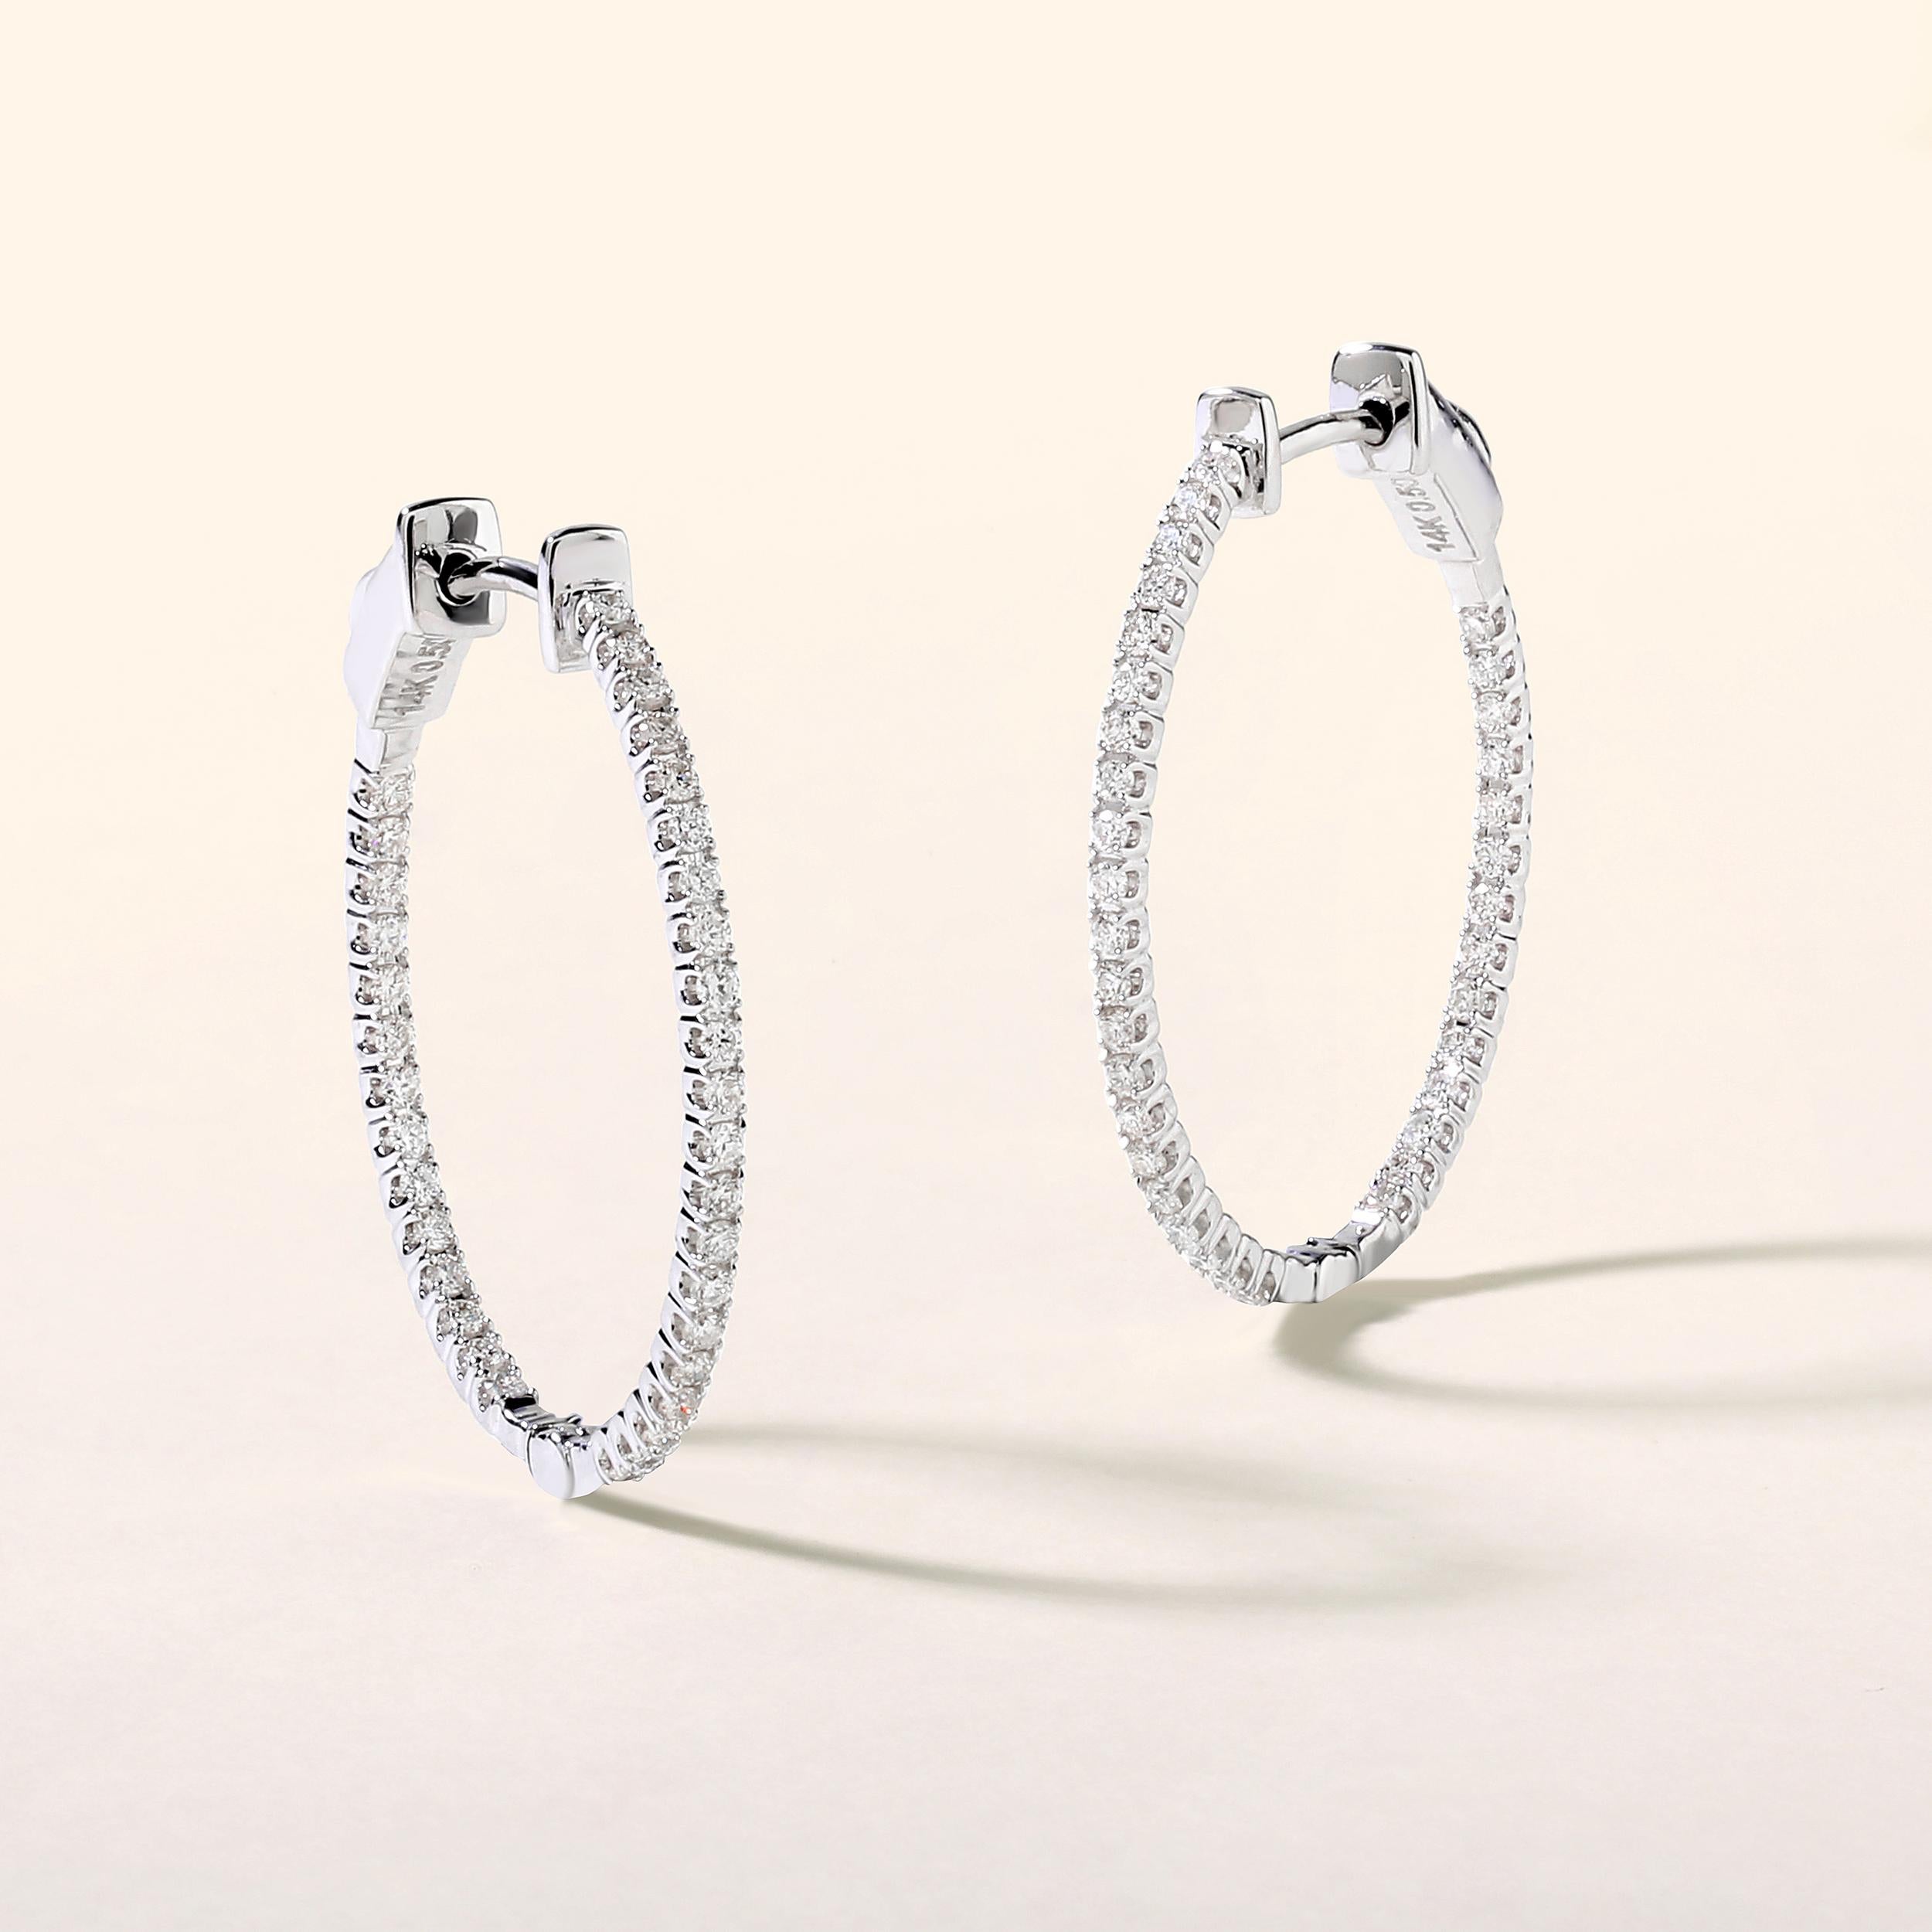 Crafted in 3.11 grams of 14K White Gold, the earrings contains 70 stones of Round Diamonds with a total of 0.5 carat in G-H color and SI clarity.

This jewelry piece will be expertly crafted by our skilled artisans upon order. Allow us a shipping